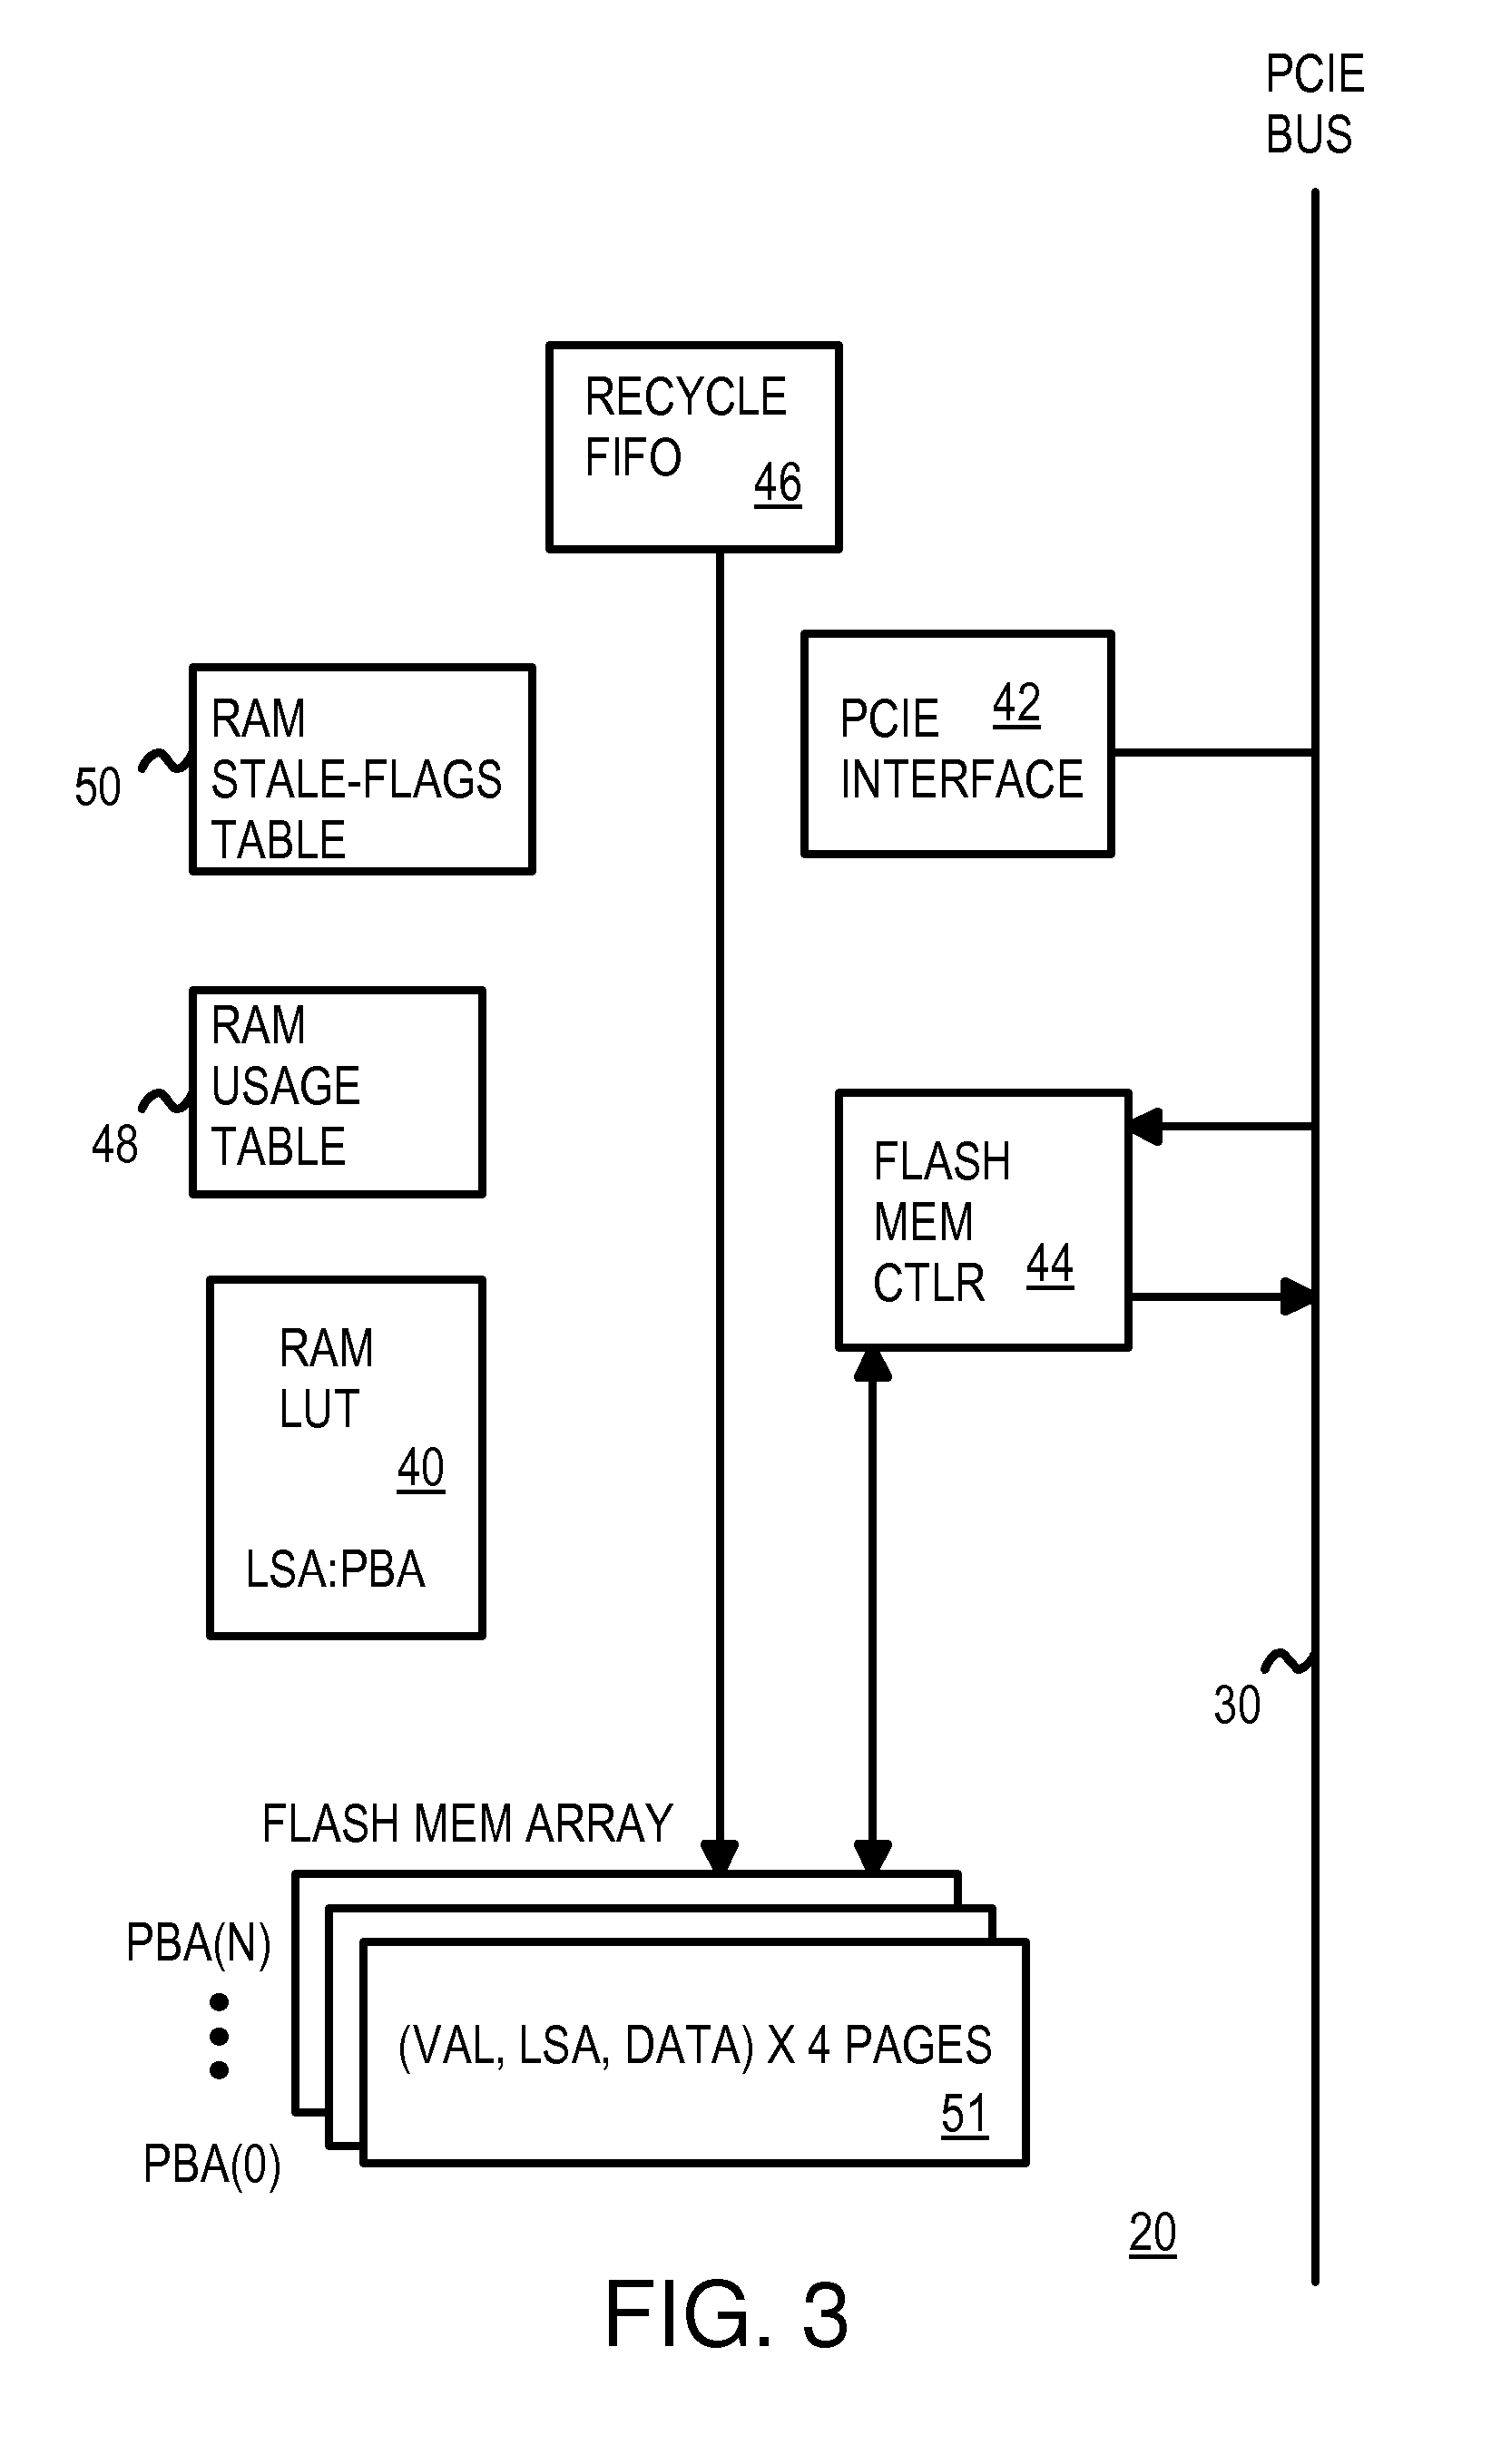 Recycling Partially-Stale Flash Blocks Using a Sliding Window for Multi-Level-Cell (MLC) Flash Memory